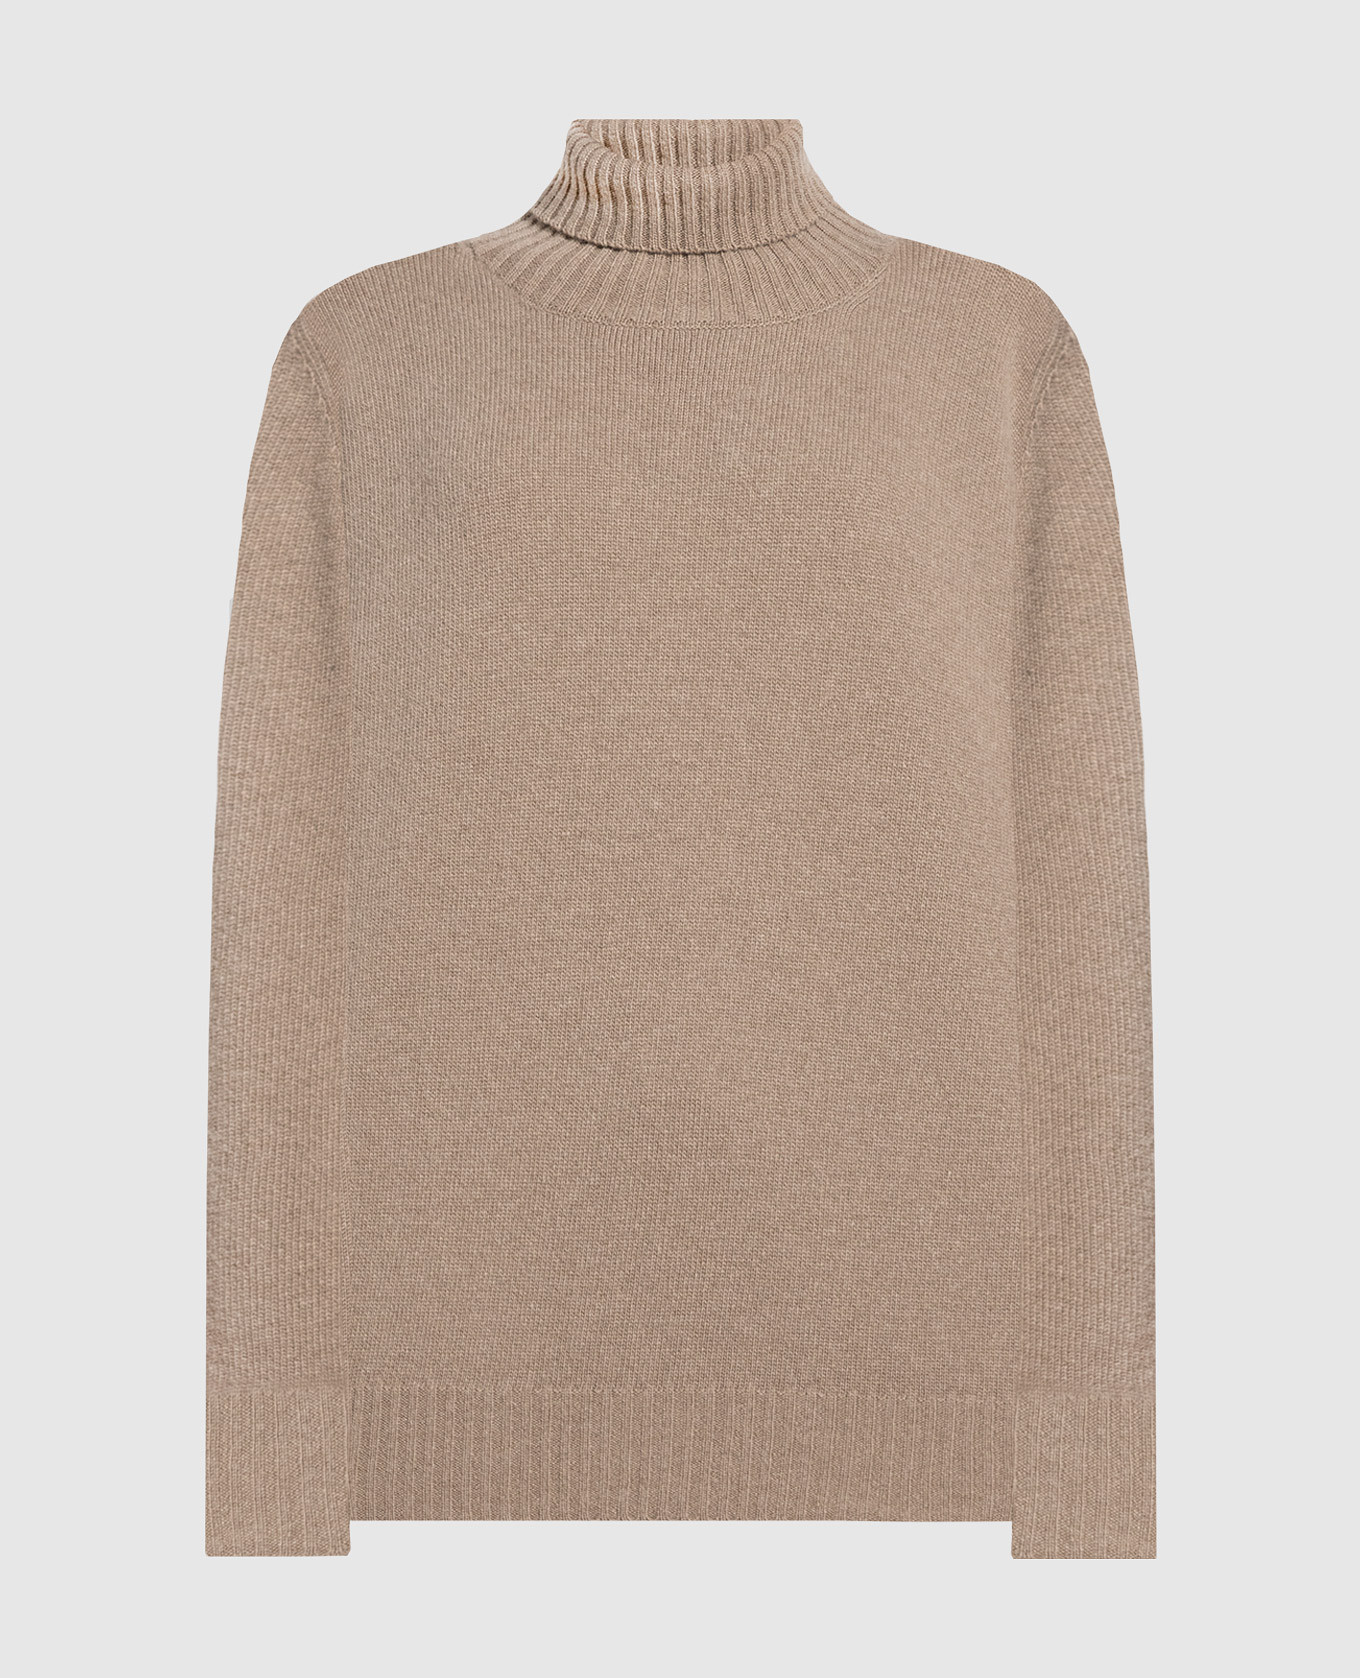 Manu brown wool and cashmere sweater